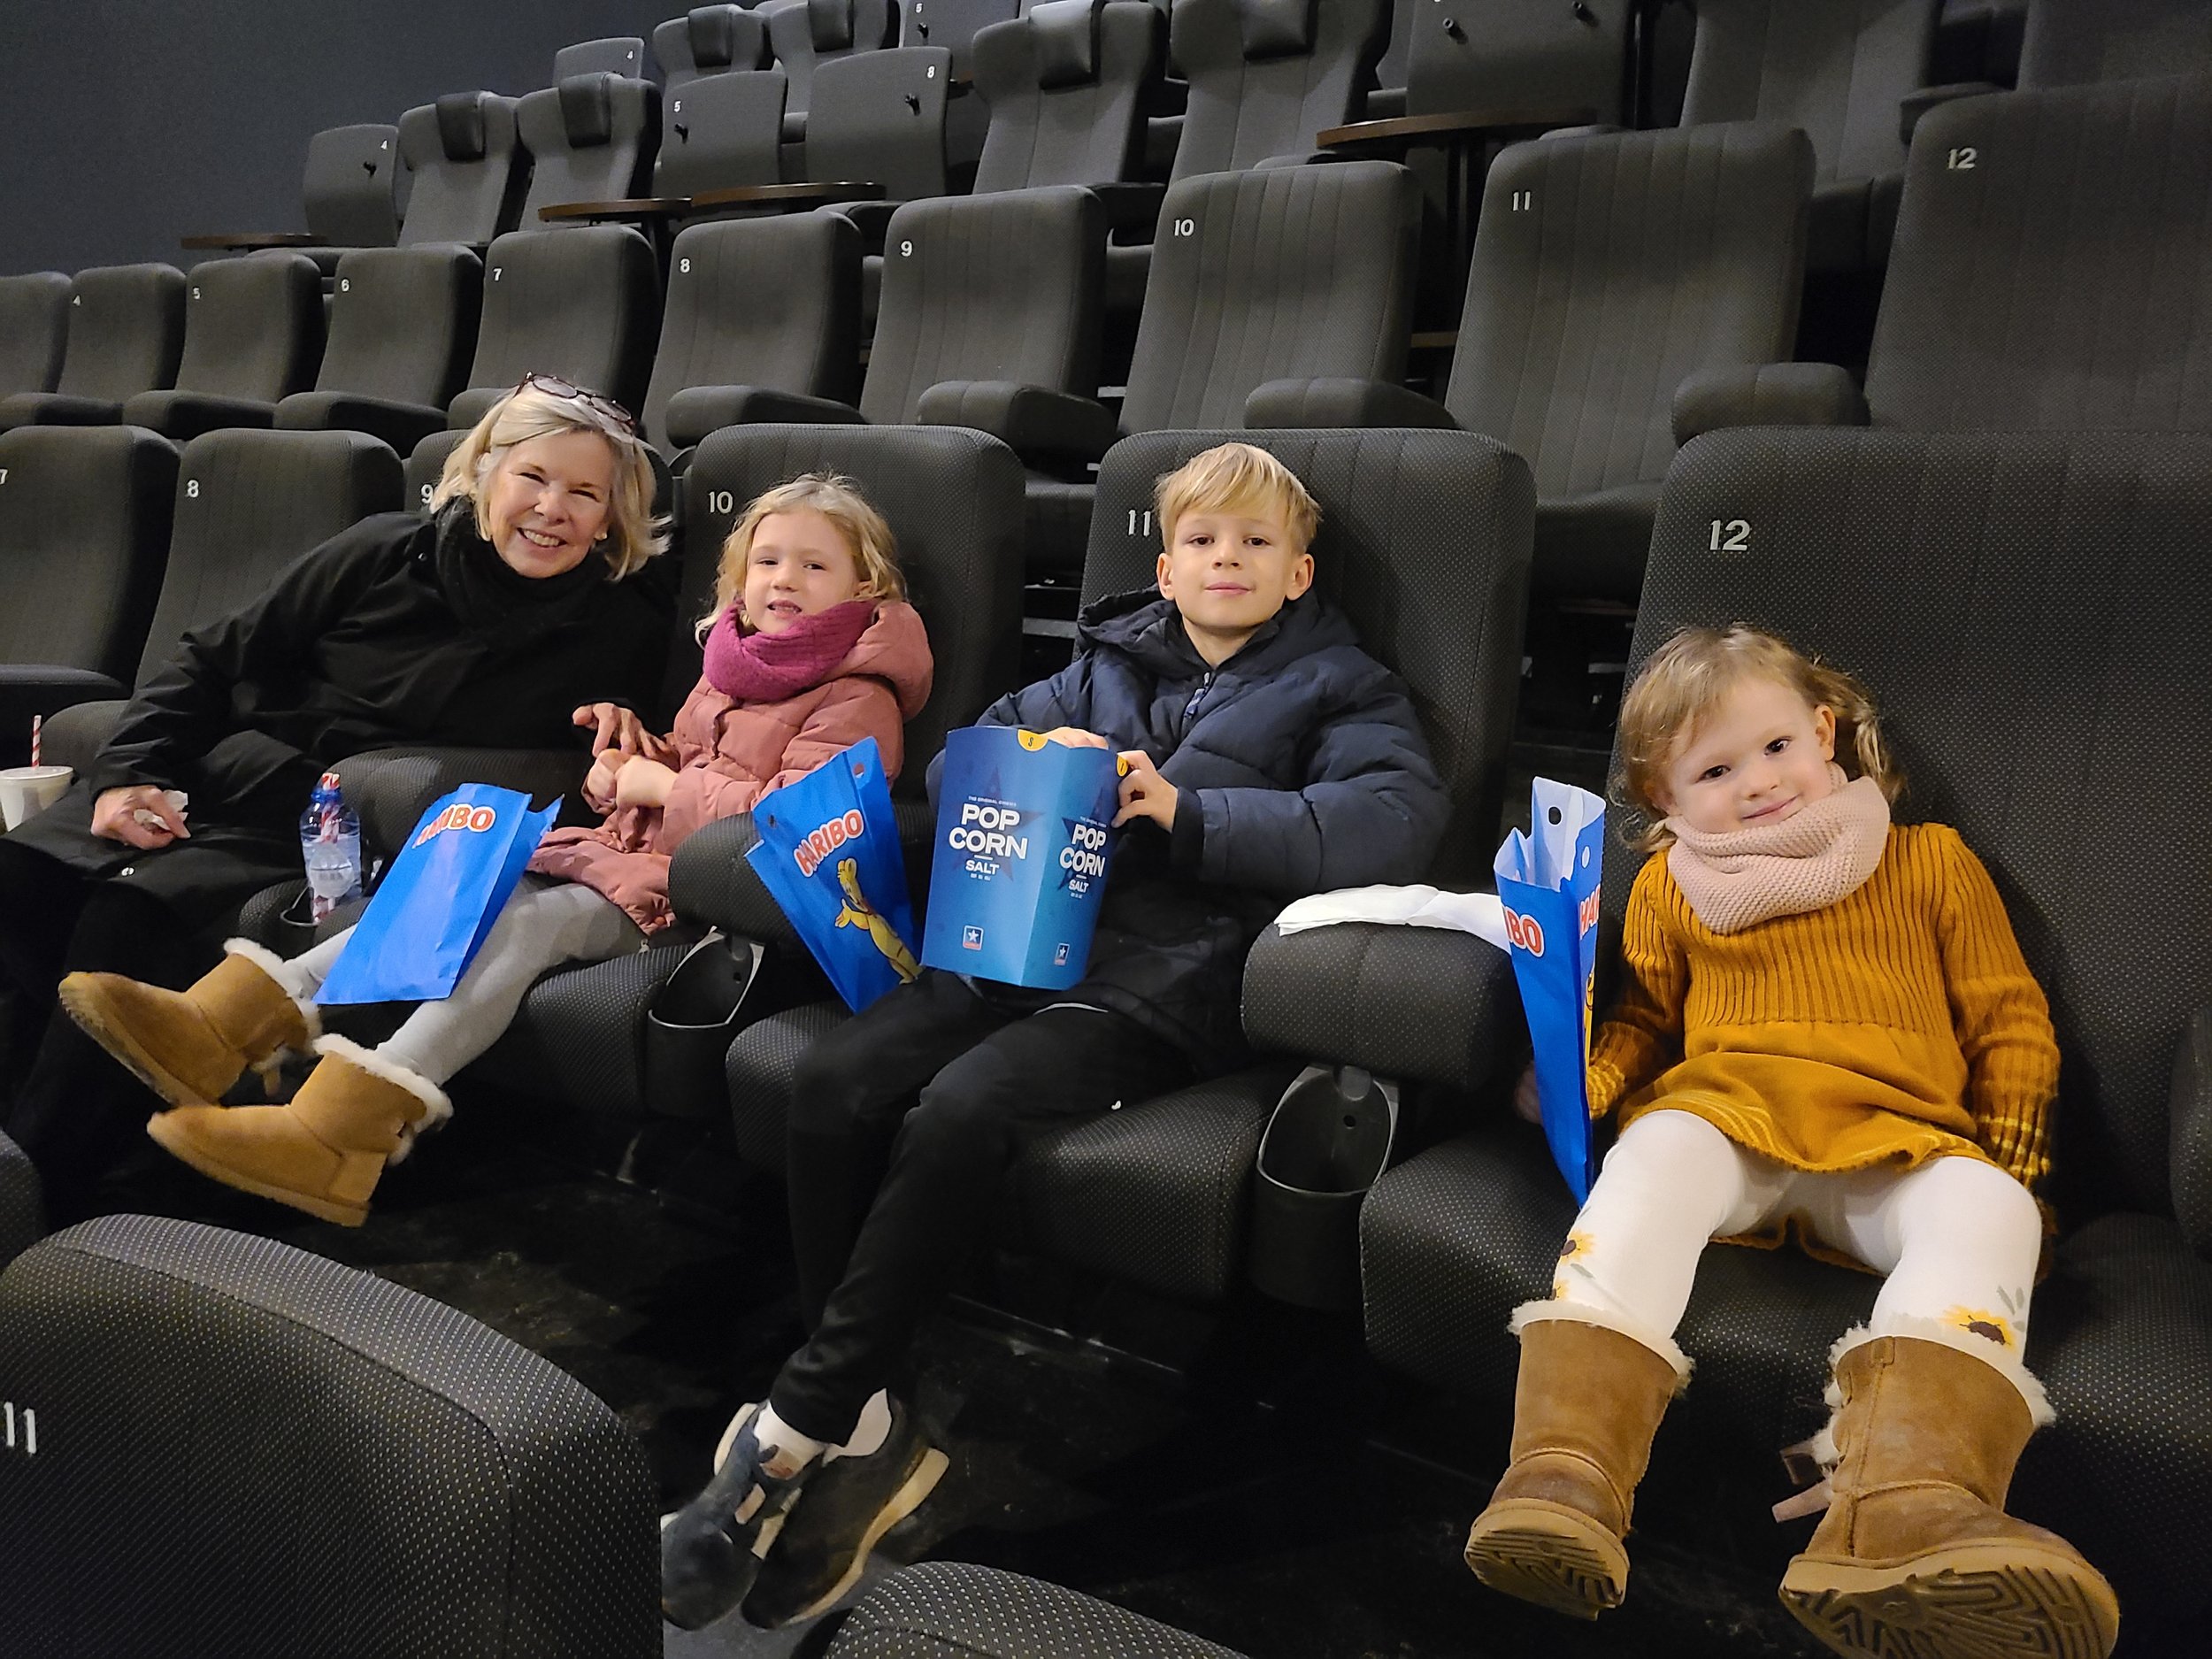 Jeri with the Kids at Kinepolis